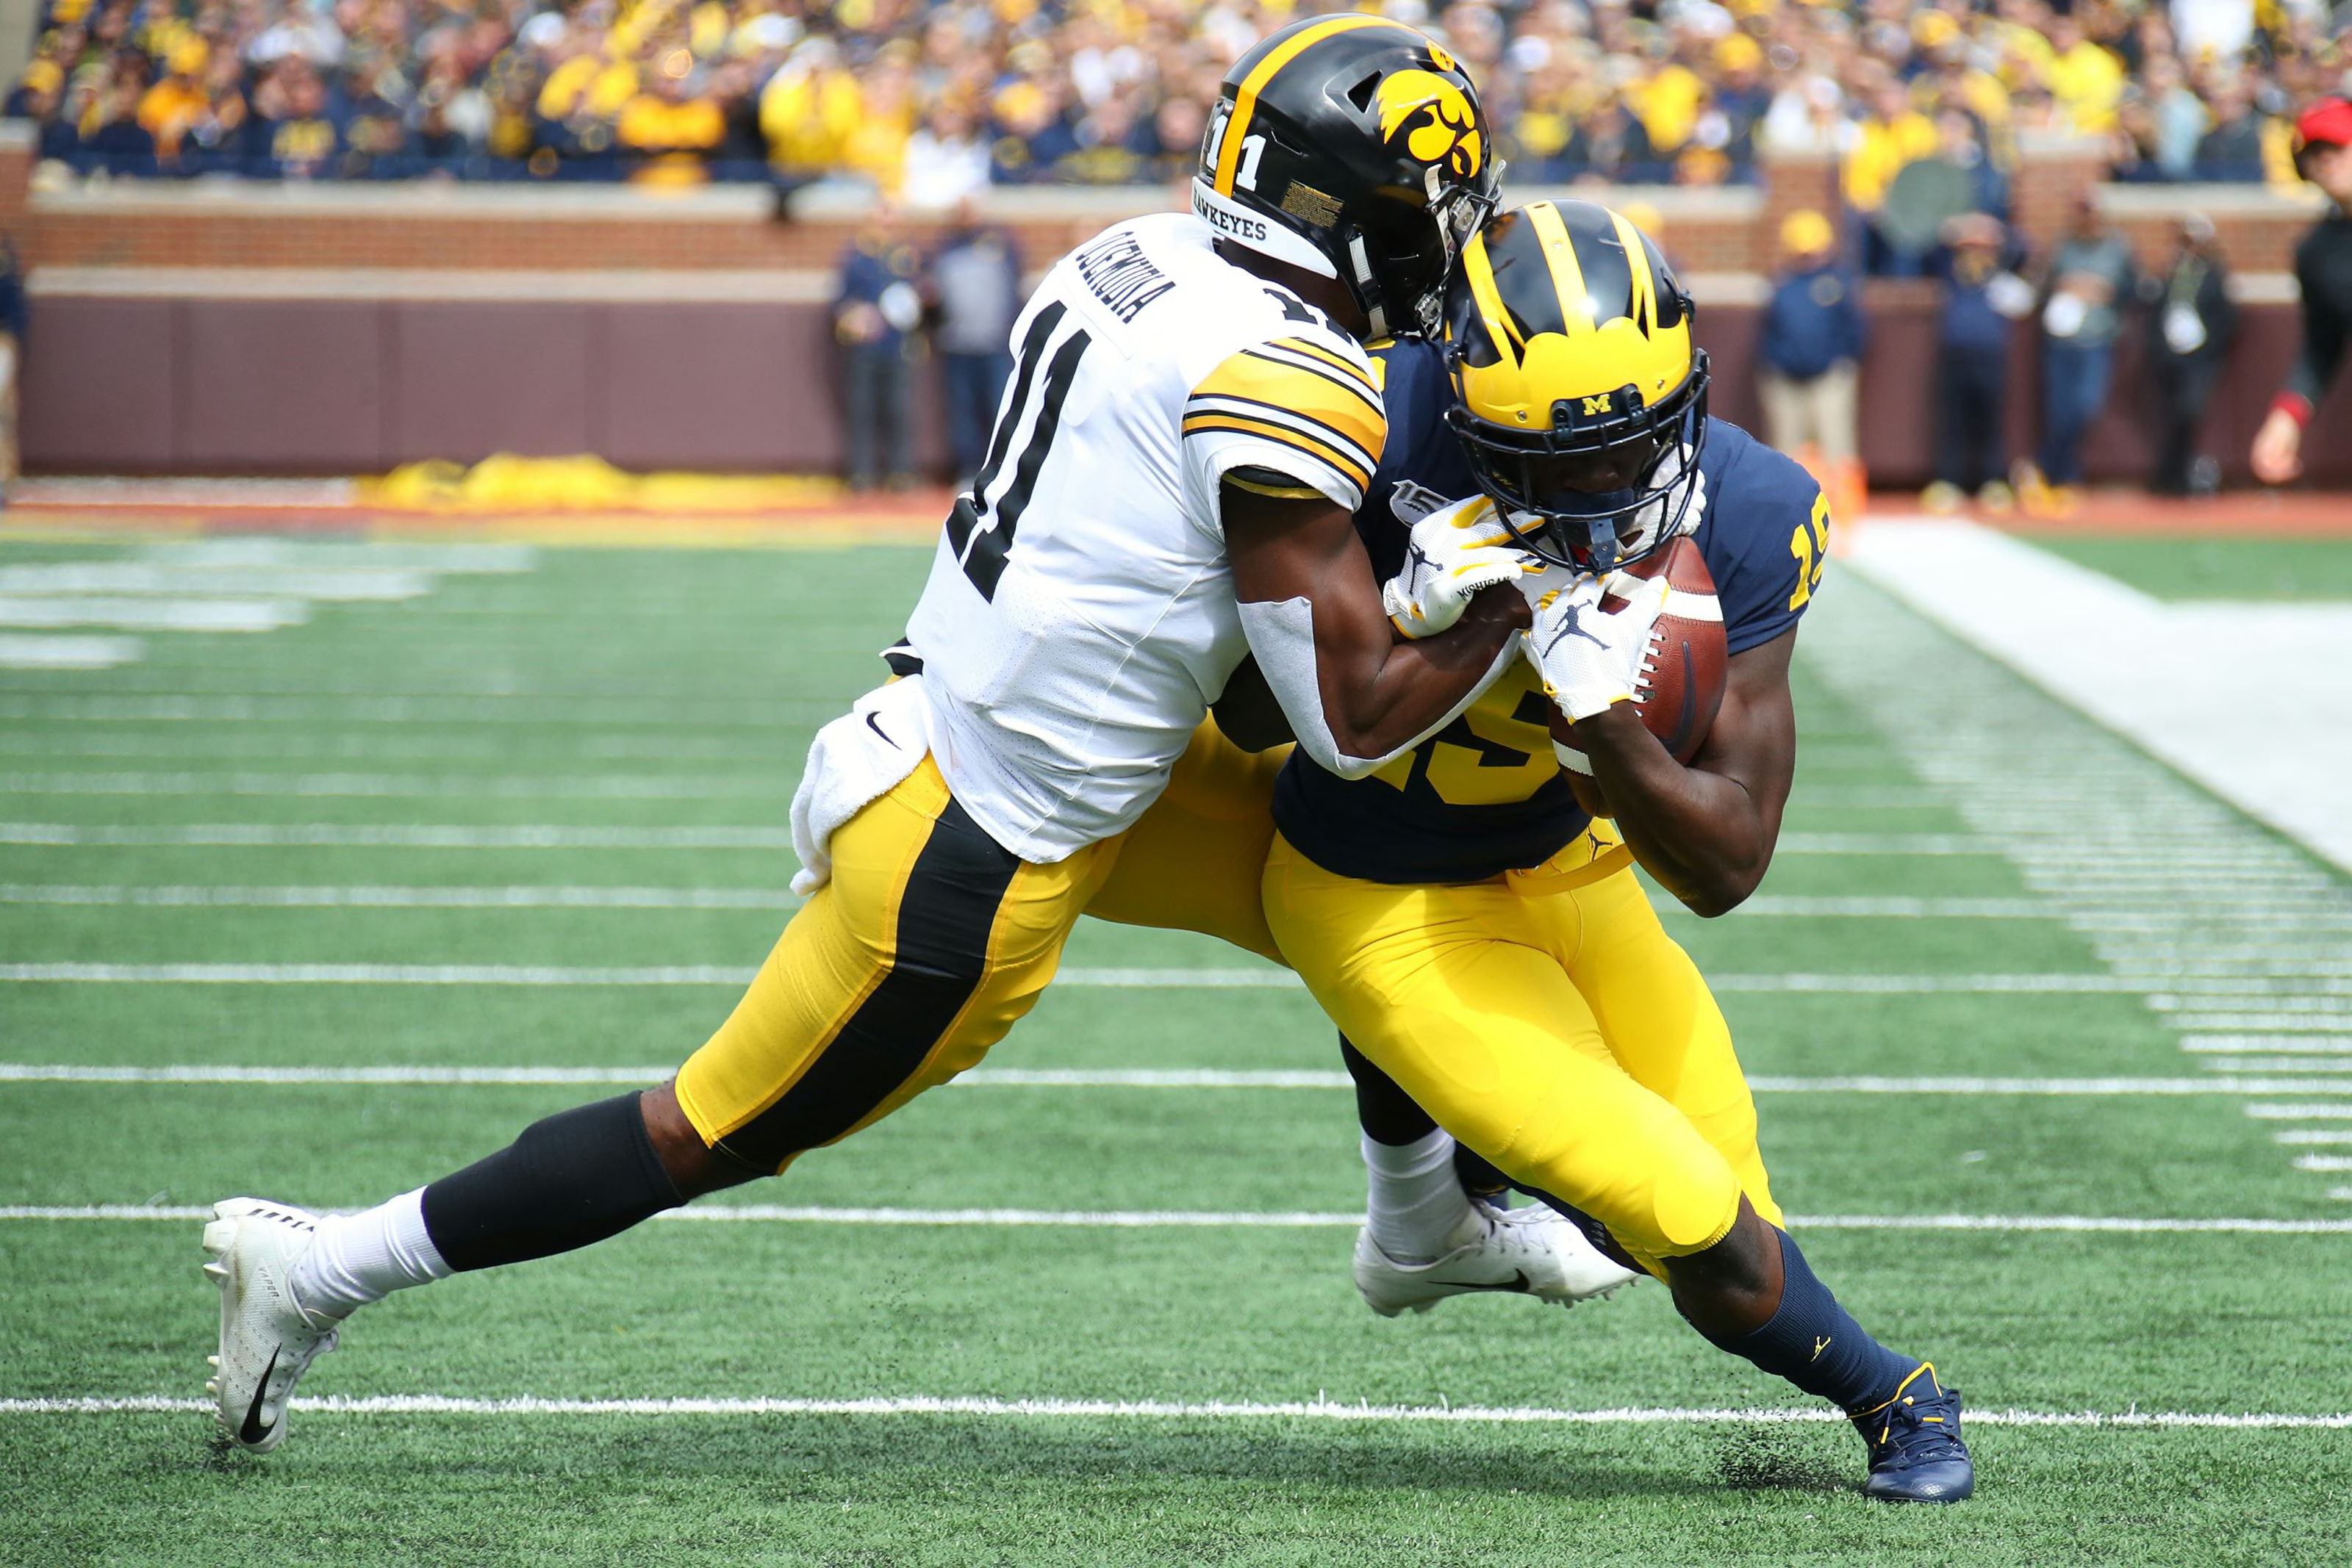 Michigan football: 3 Reasons to believe in the Wolverines offense - Page 2